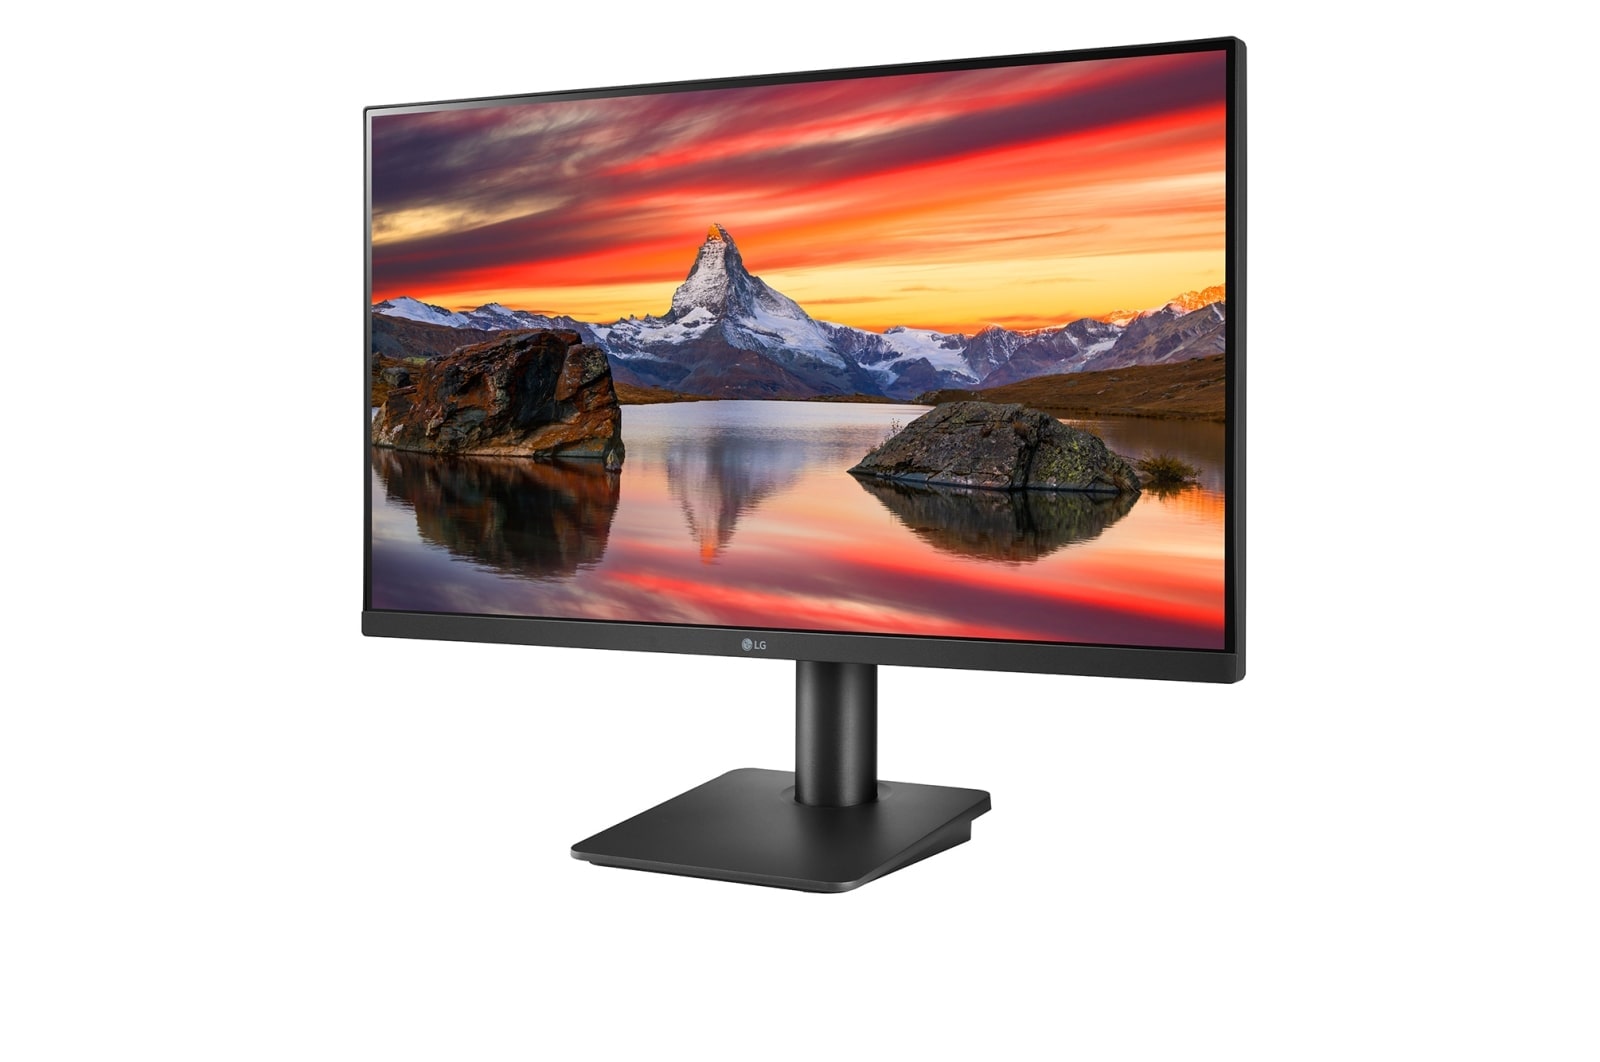 LG 27 inch (68.6 cm) IPS FHD (1920x1080 Pixels), HDR 10, Height Adjust, Display Port, HDMI, AMD FreeSync, 75 Hz Refresh, Black Color - 27MP450-Computerspace-computerspace